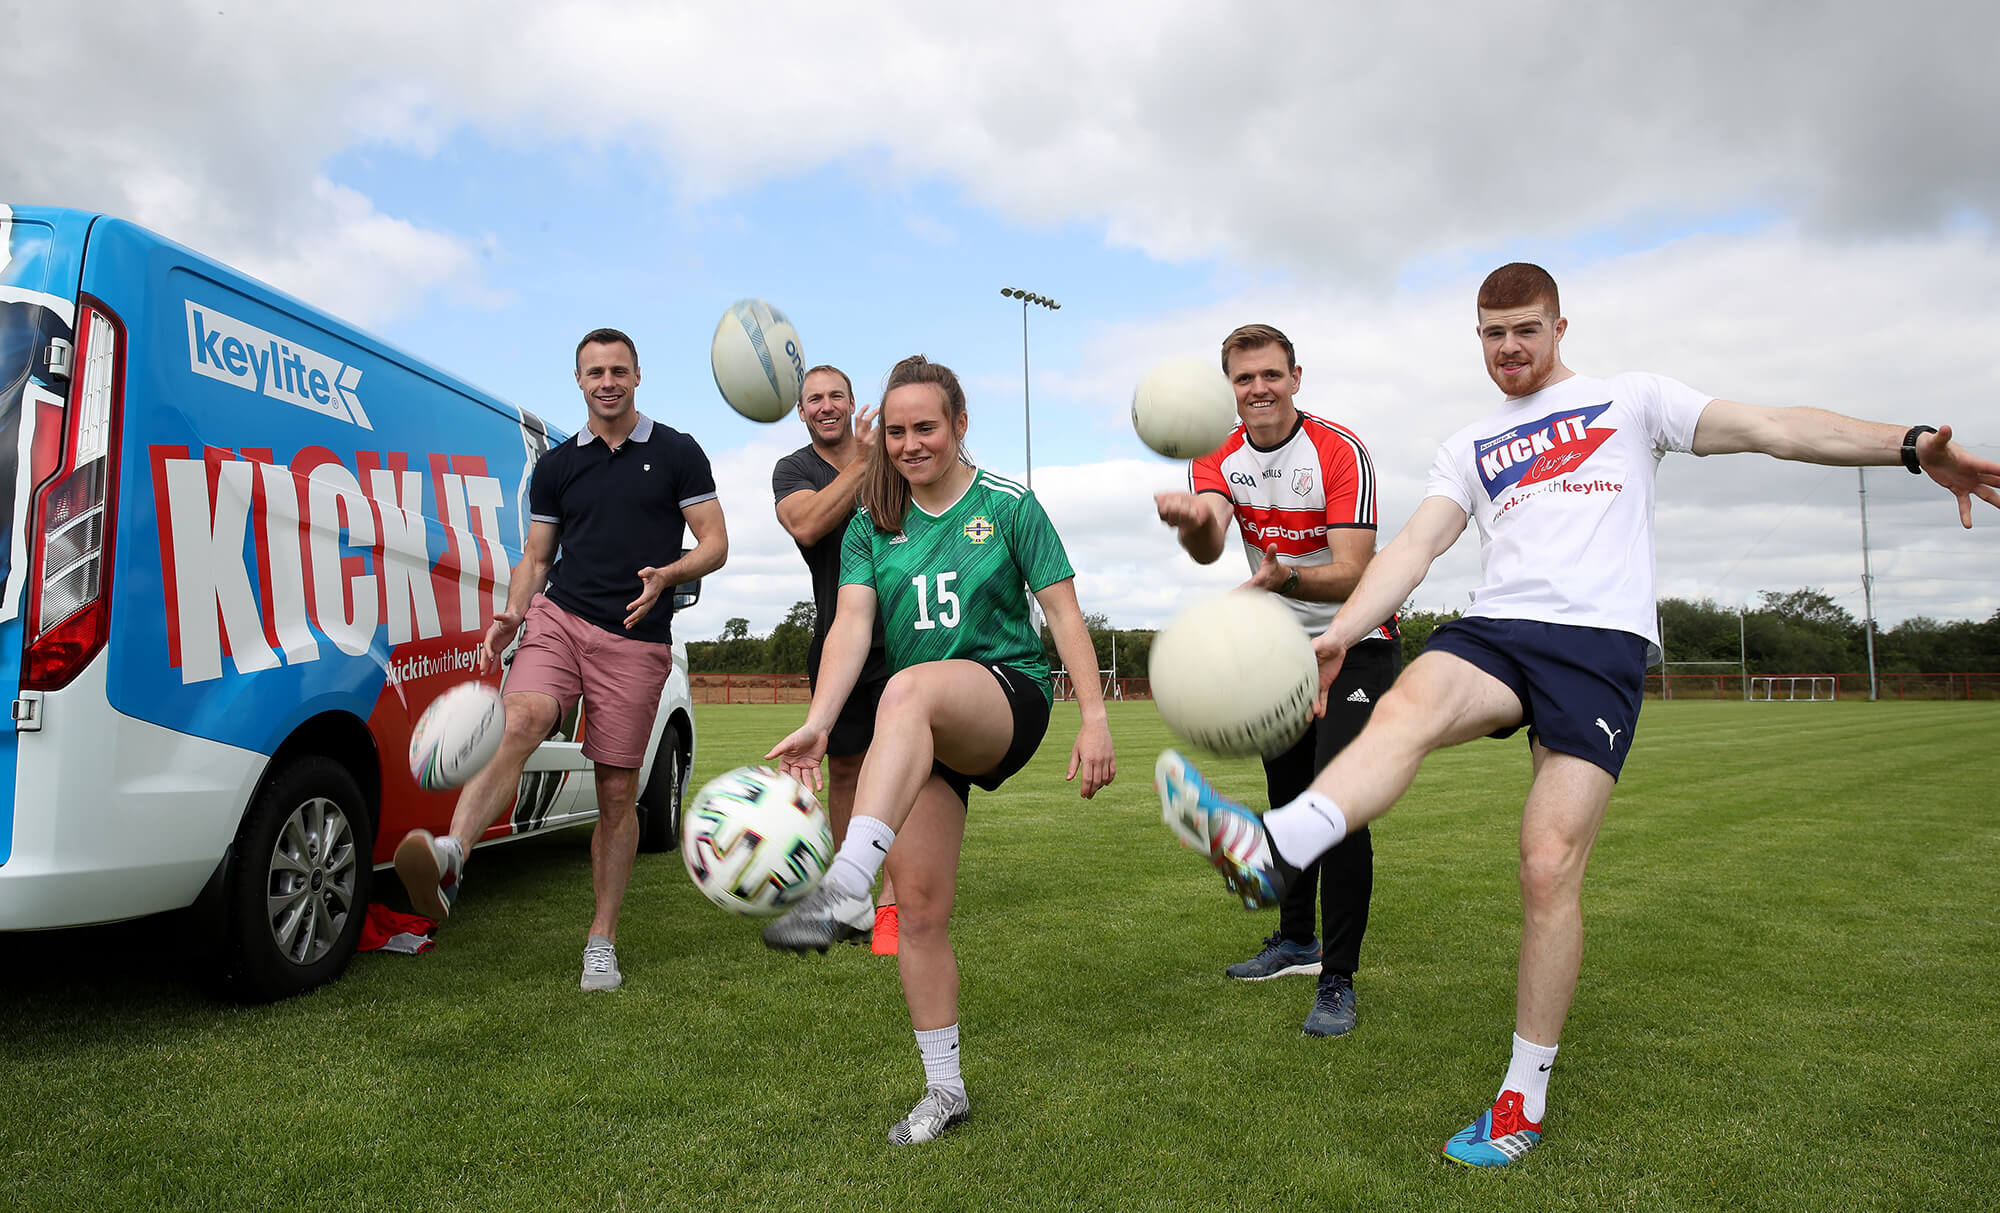 Join some of Ireland’s biggest sports stars and #KickItWithKeylite